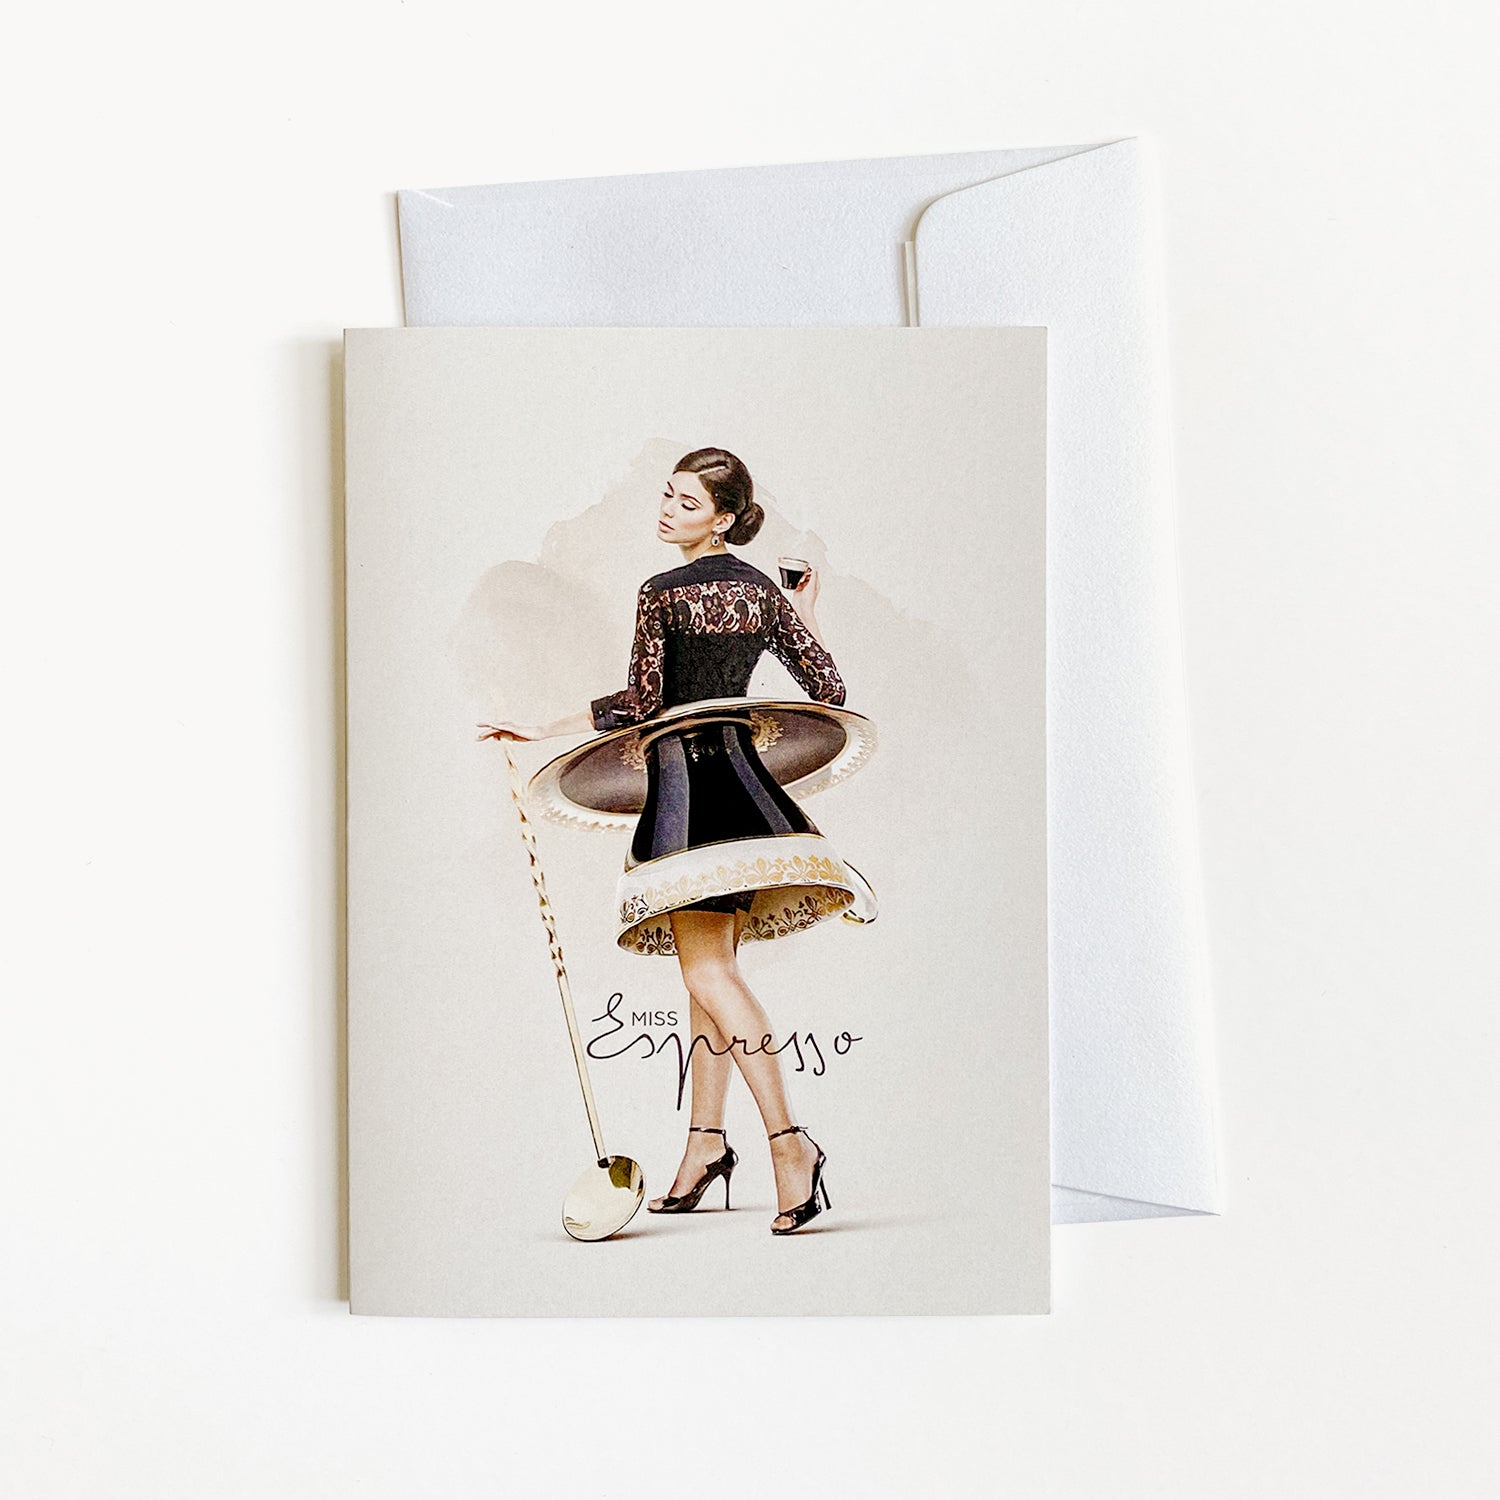 'Cafe Style' Greeting Cards